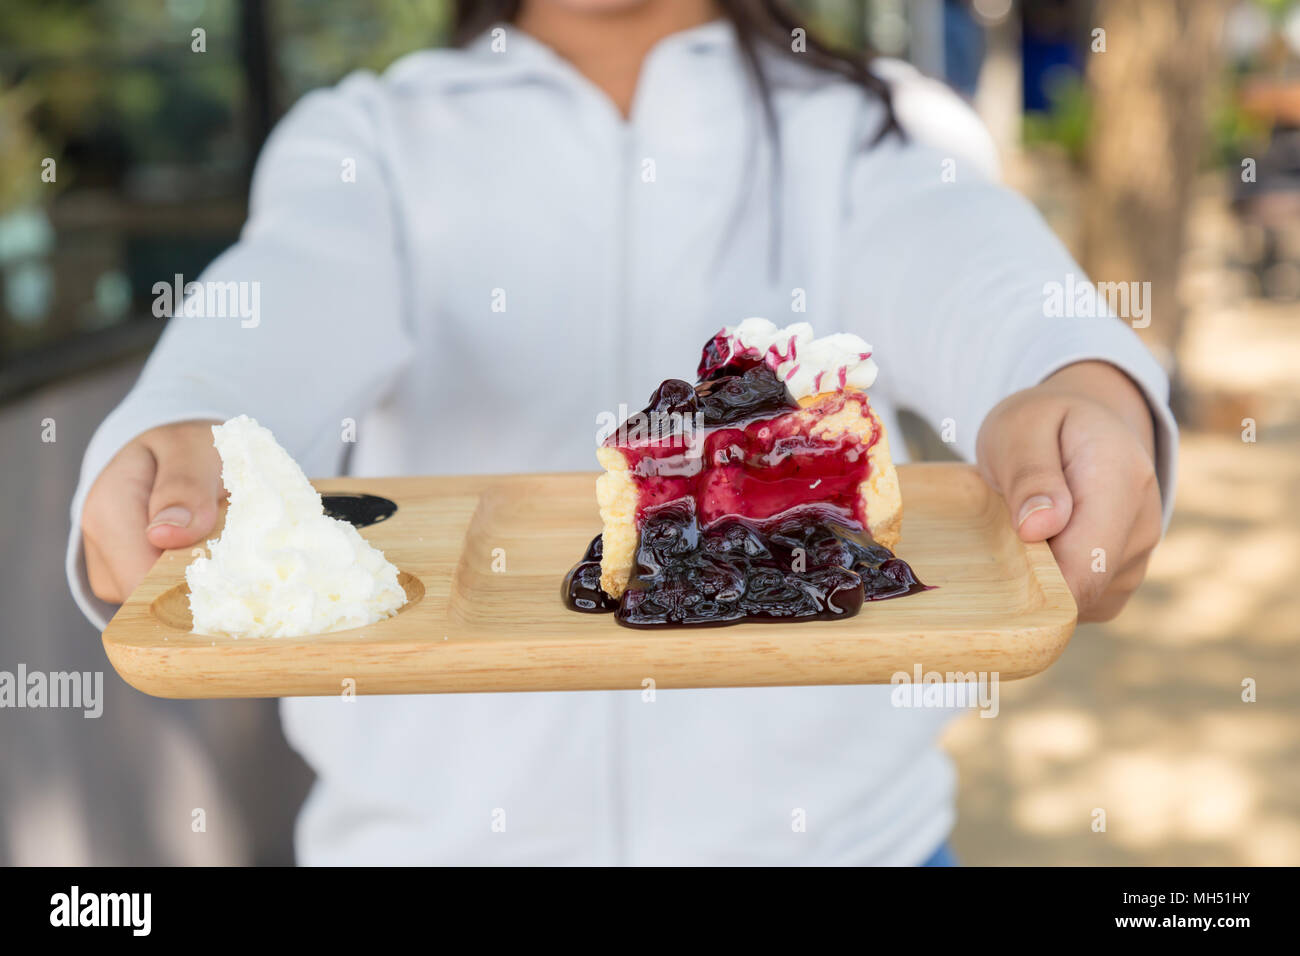 Asia teenage girl filed the blueberry cheesecake comes in front. Stock Photo